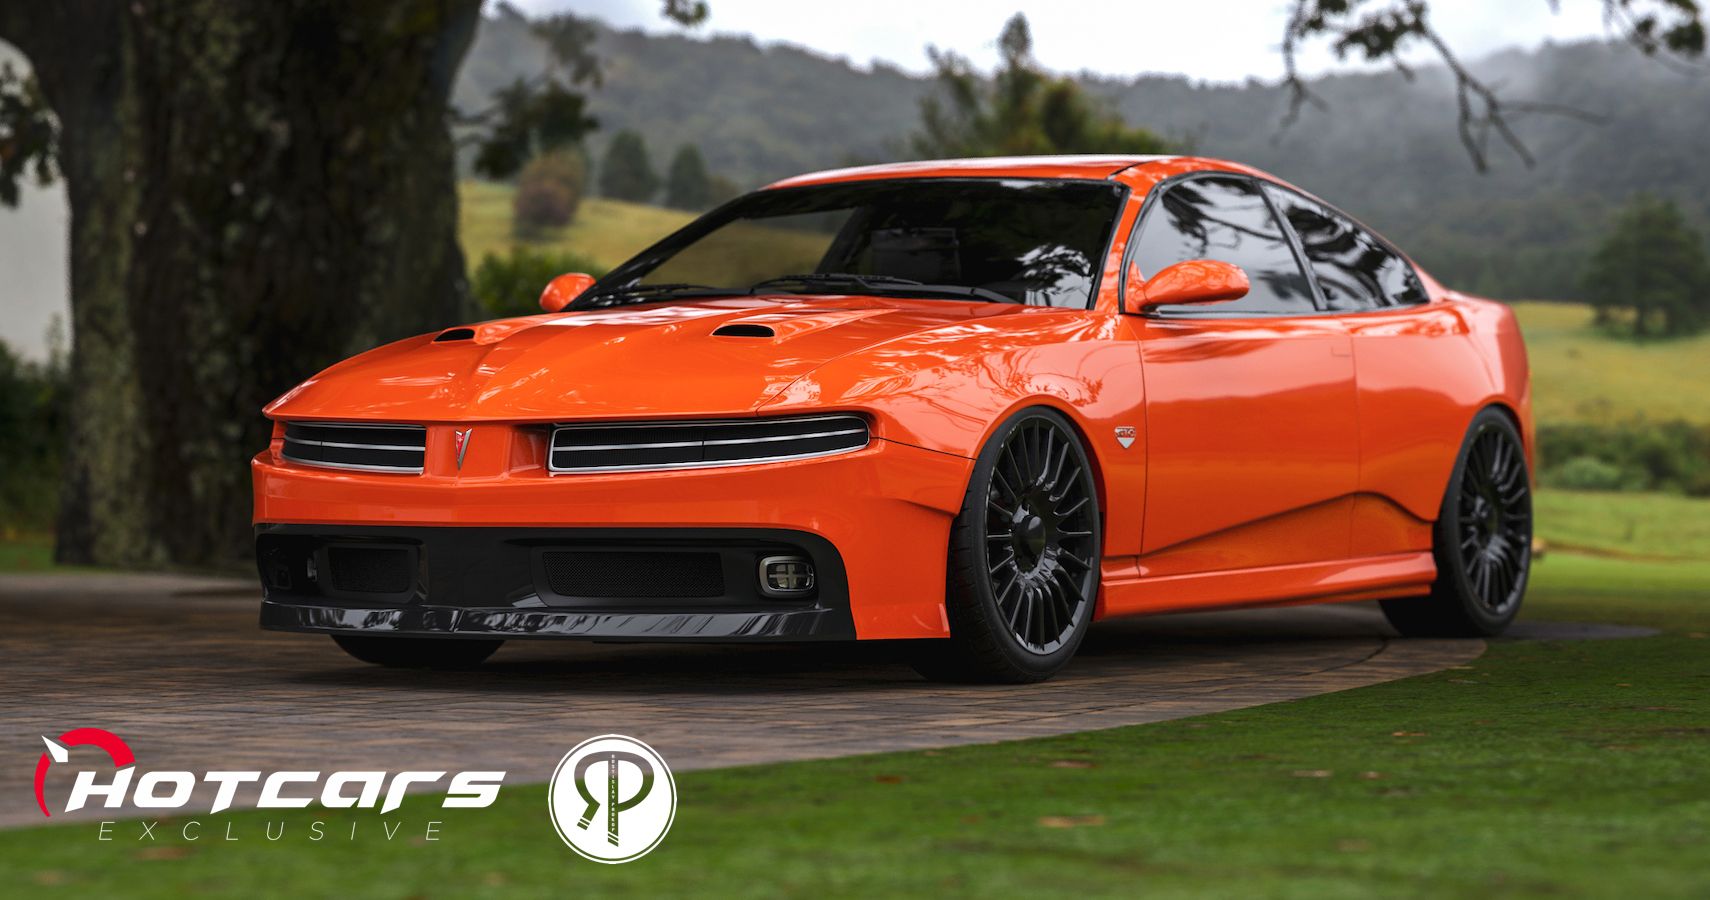 EXCLUSIVE This Revived Muscle Car Render Shows Us What A Modern